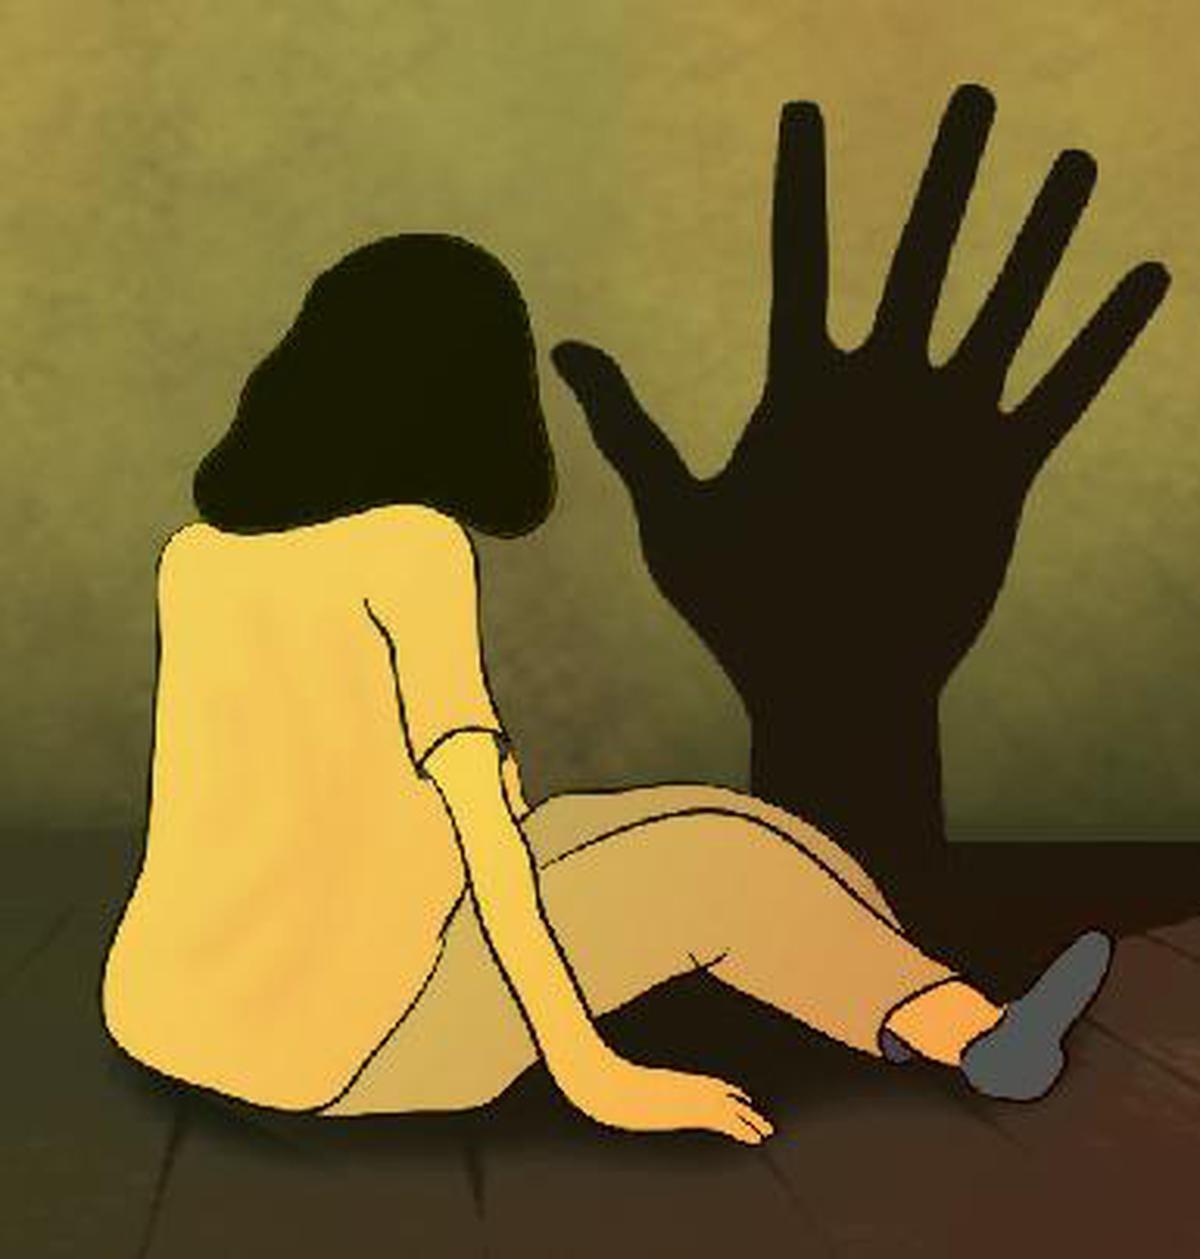 Youth allegedly attempts to rape five-year old girl at Malkapuram, in Visakhapatnam